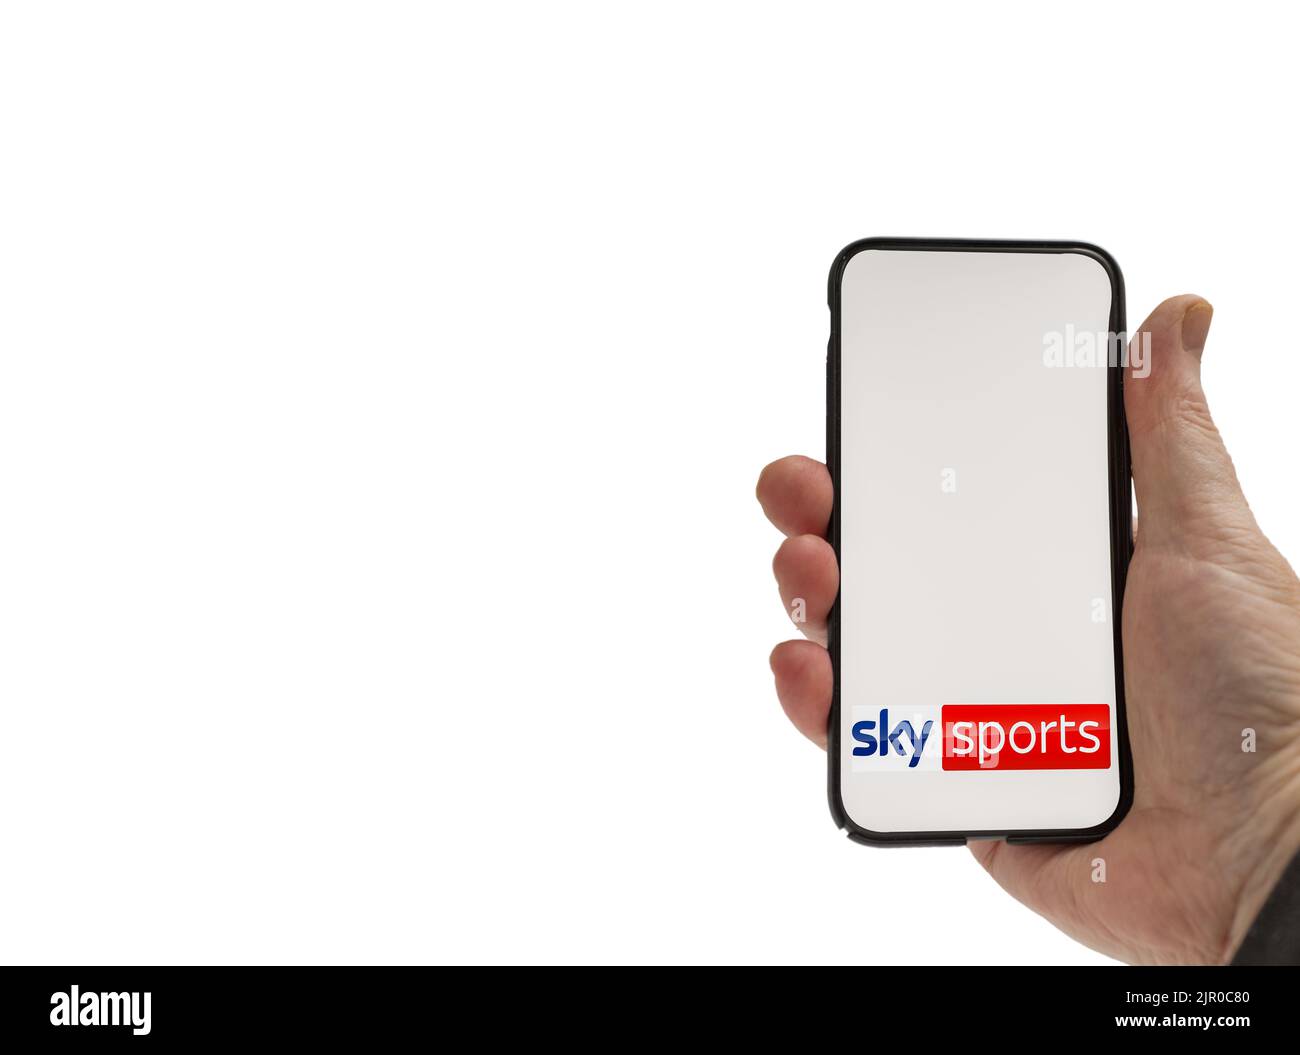 Cardiff Mid glamorgan Wales UK  August 20 2022 Person holding cellphone   with logo of SkySports digital services Stock Photo